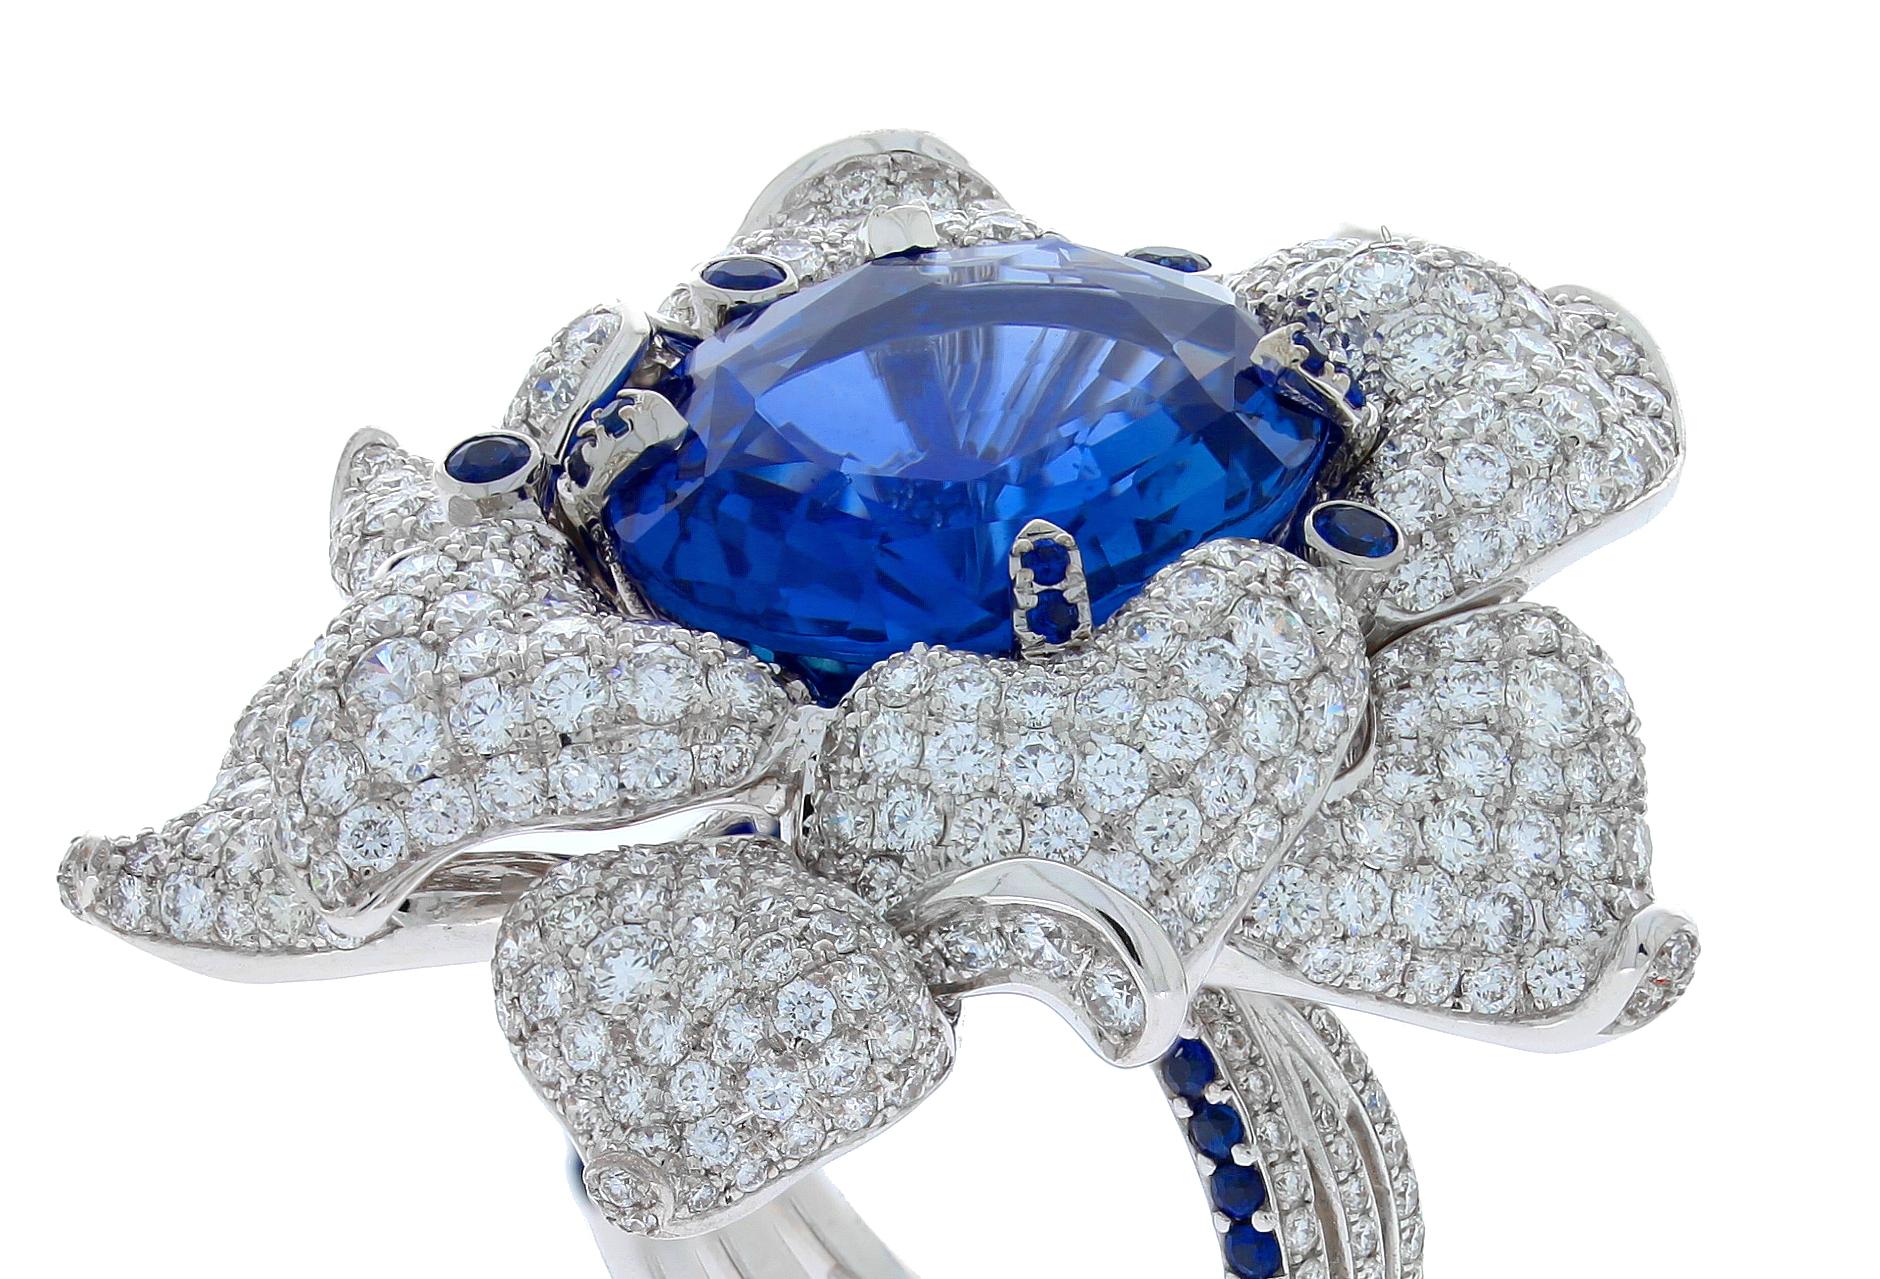 Oval Cut Chatila 20.93 Carat Non-Heated Ceylon Sapphire and Diamond Flower Ring For Sale